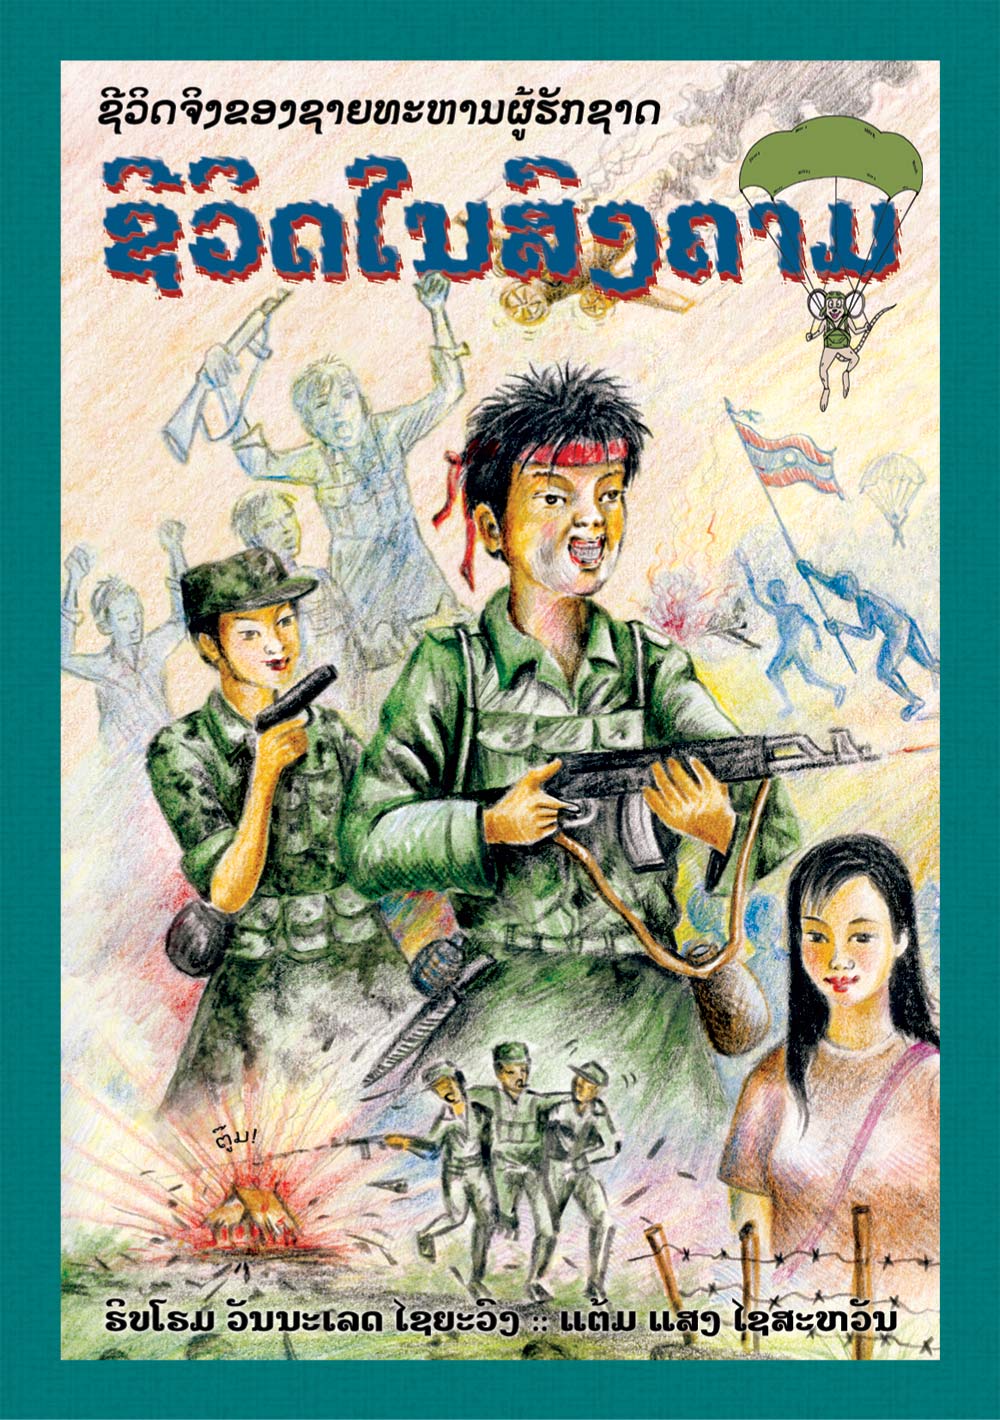 Life in the War large book cover, published in Lao language